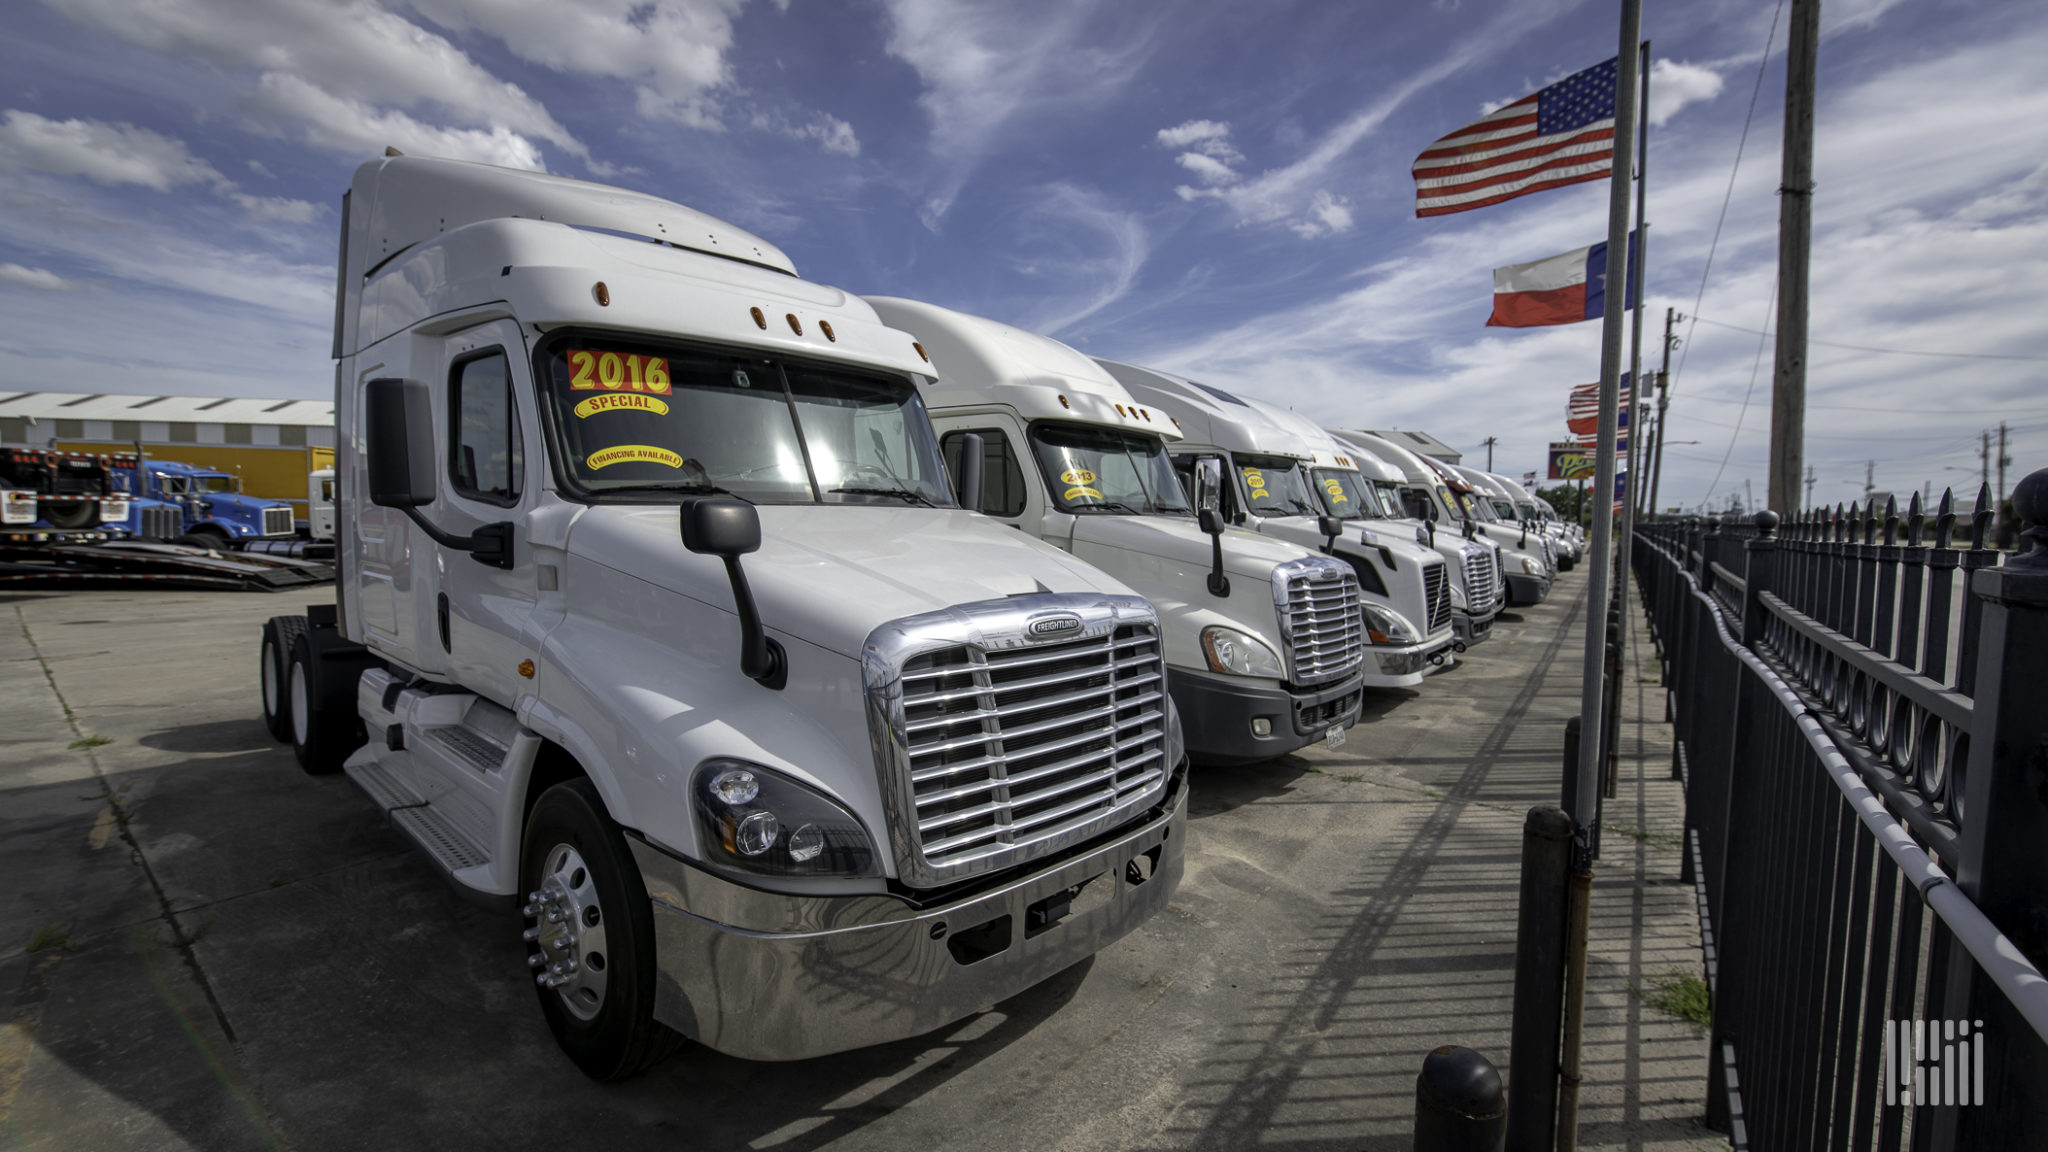 Used Trucks Sales Continue Climb From Abyss